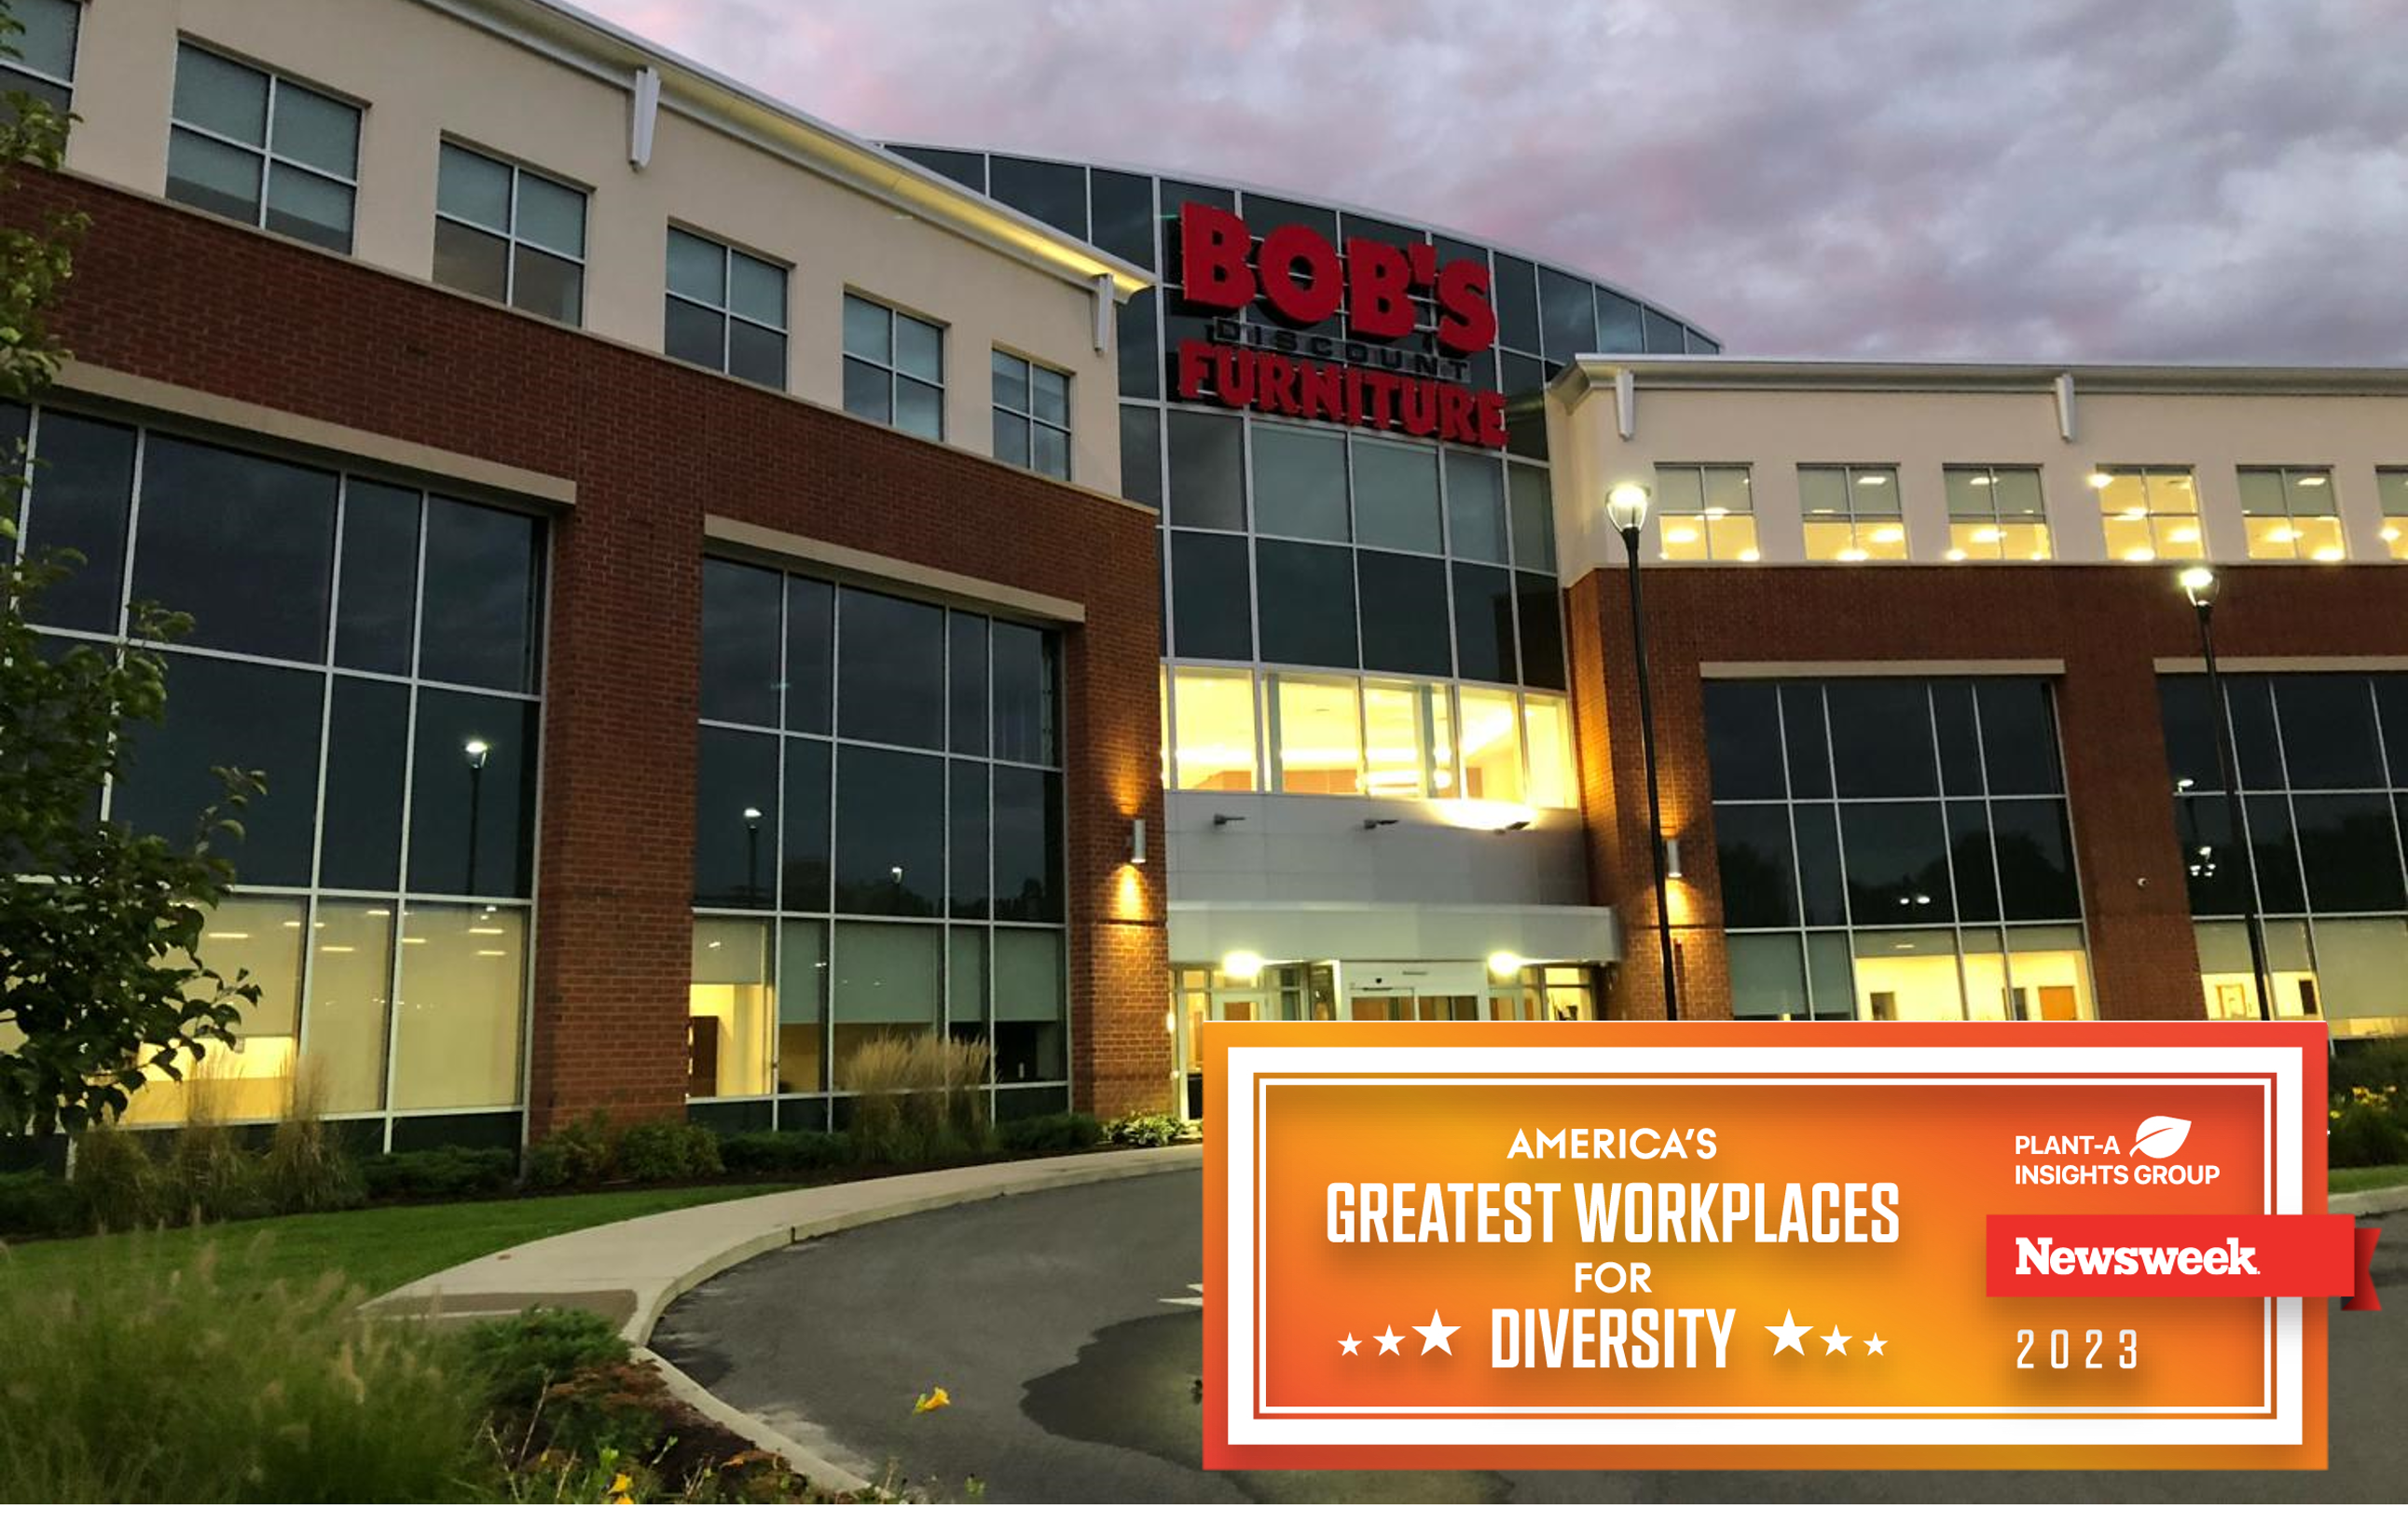 Bob’s Discount Furniture Named to Newsweek’s ‘America’s Greatest Workplaces for Diversity 2023’